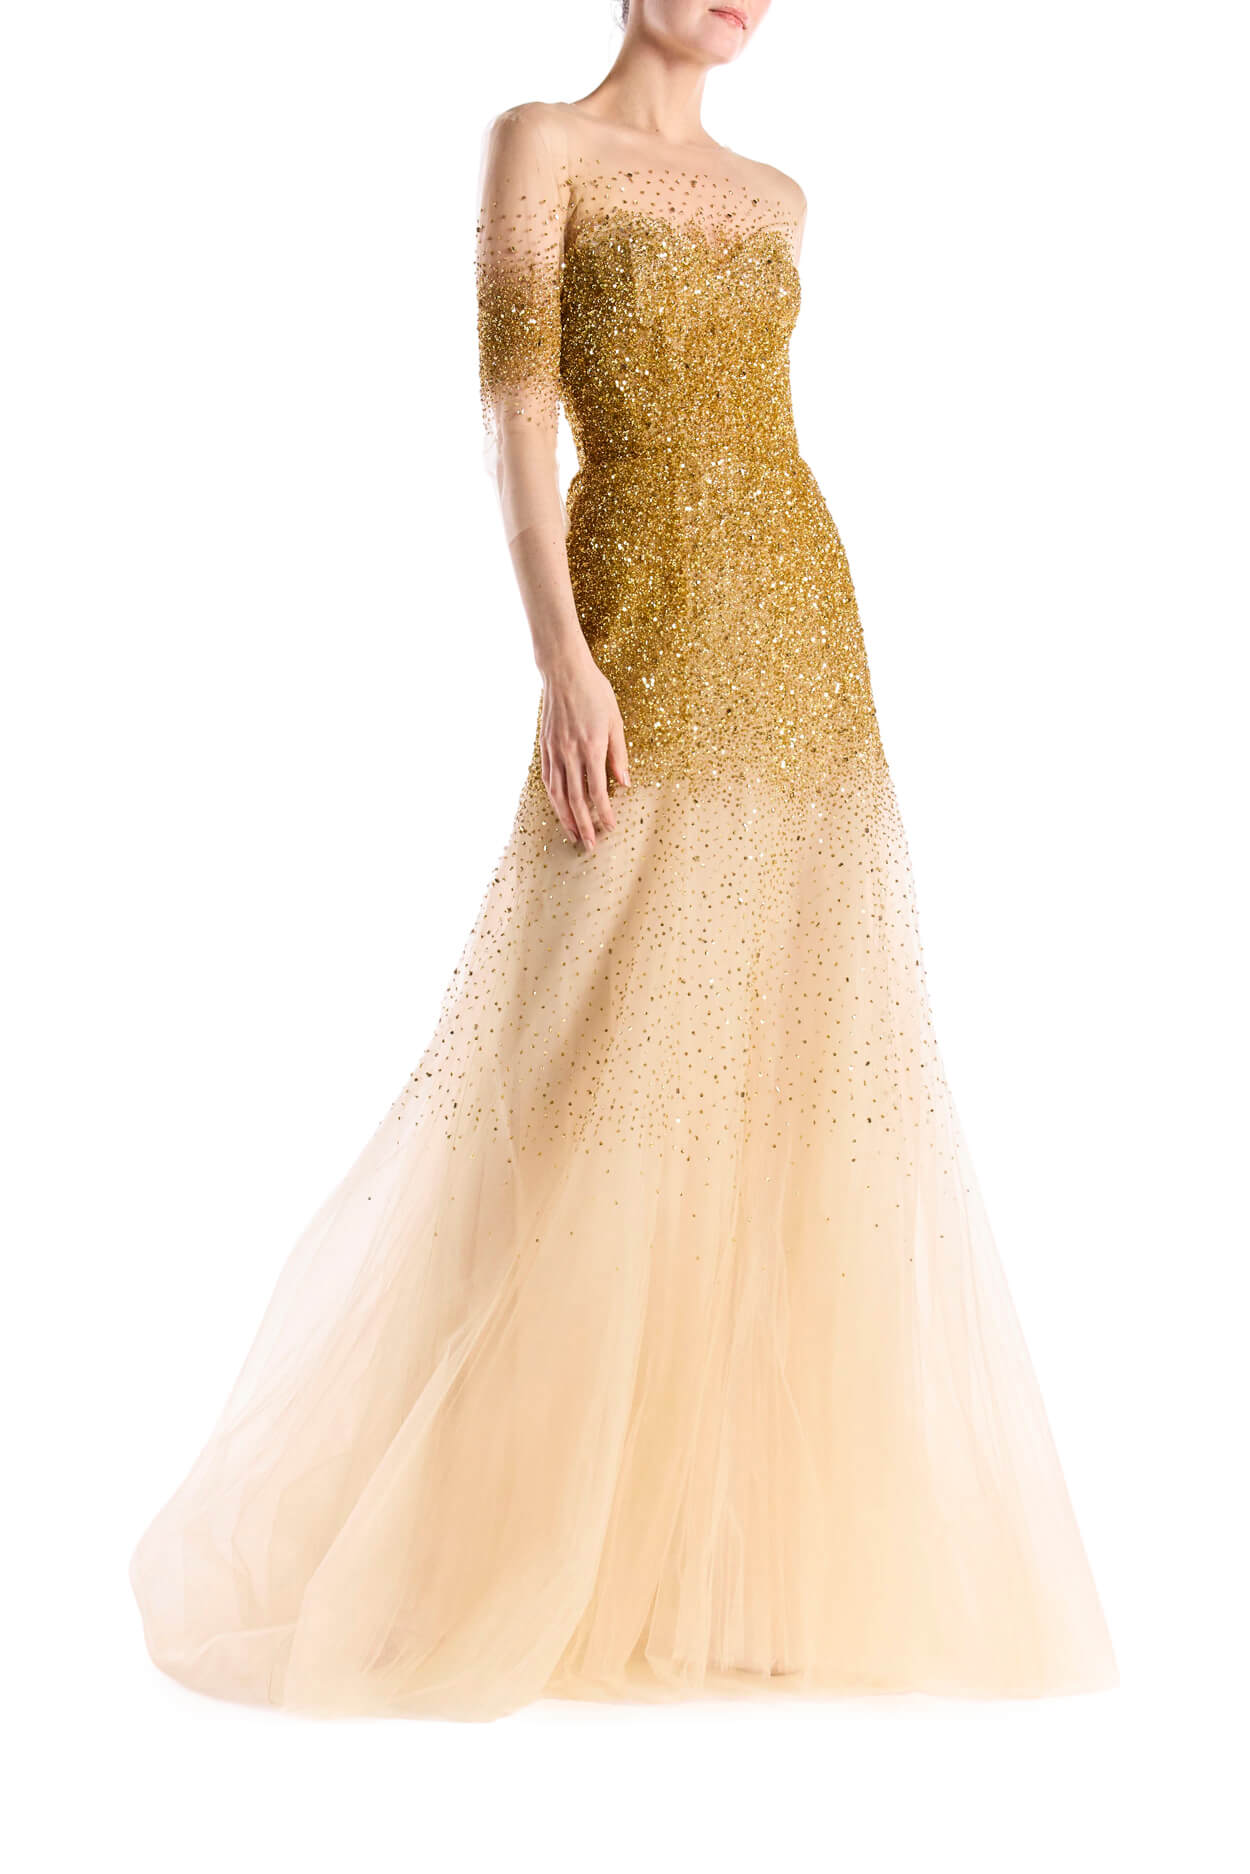 Monique Lhuillier illusion neckline and sheer 3/4 sleeve ballgown with cascading gold embroidery.